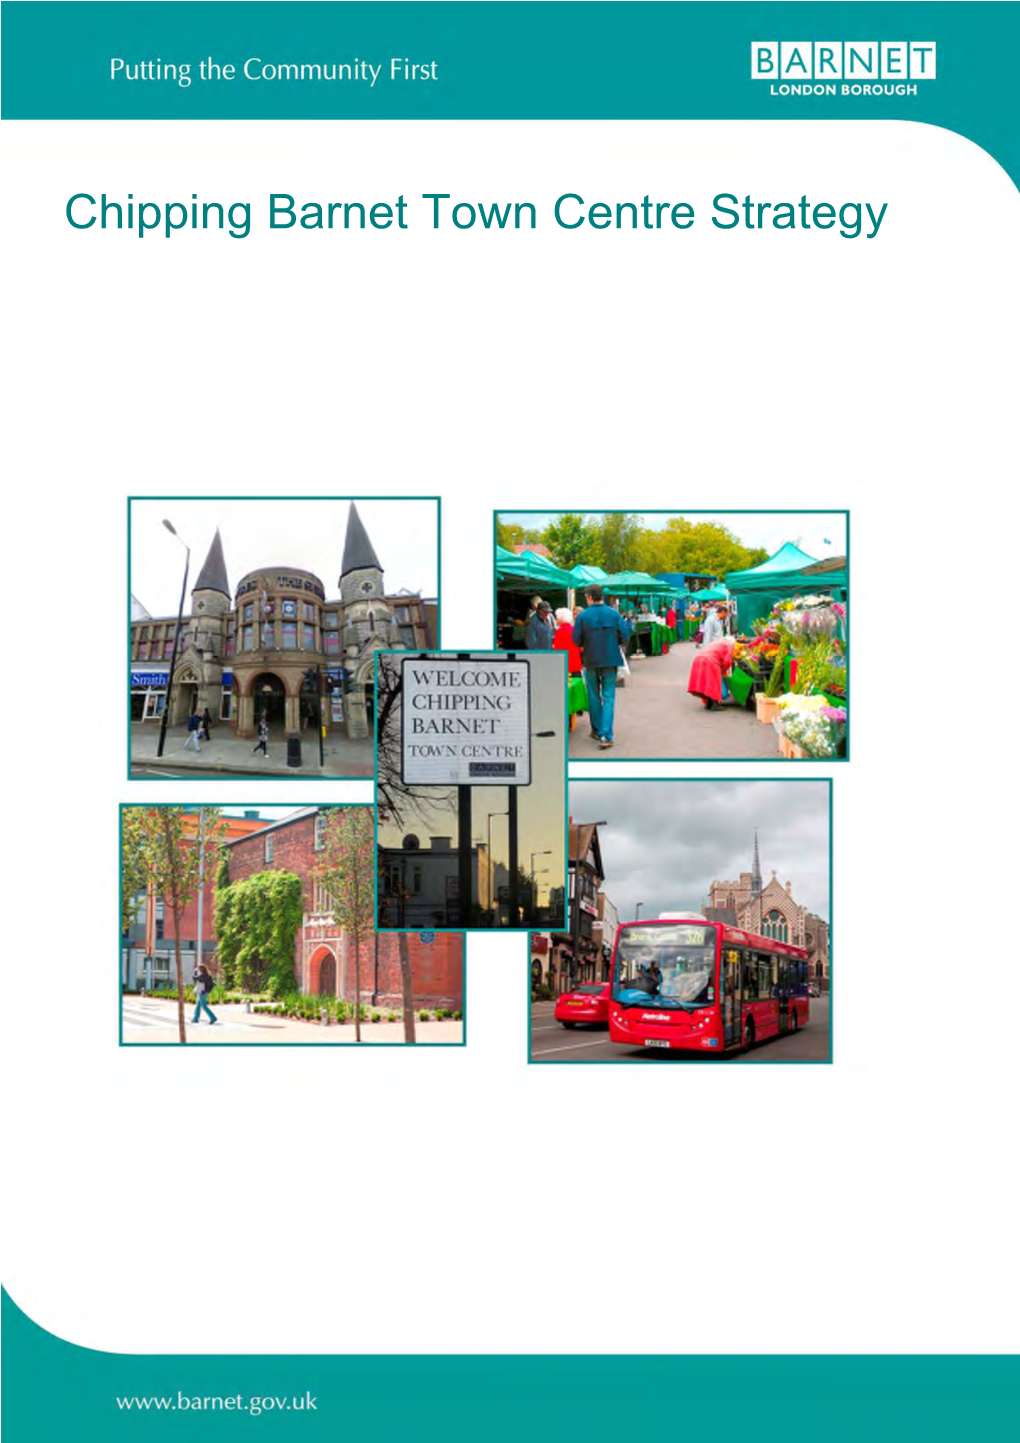 Chipping Barnet Town Centre Strategy